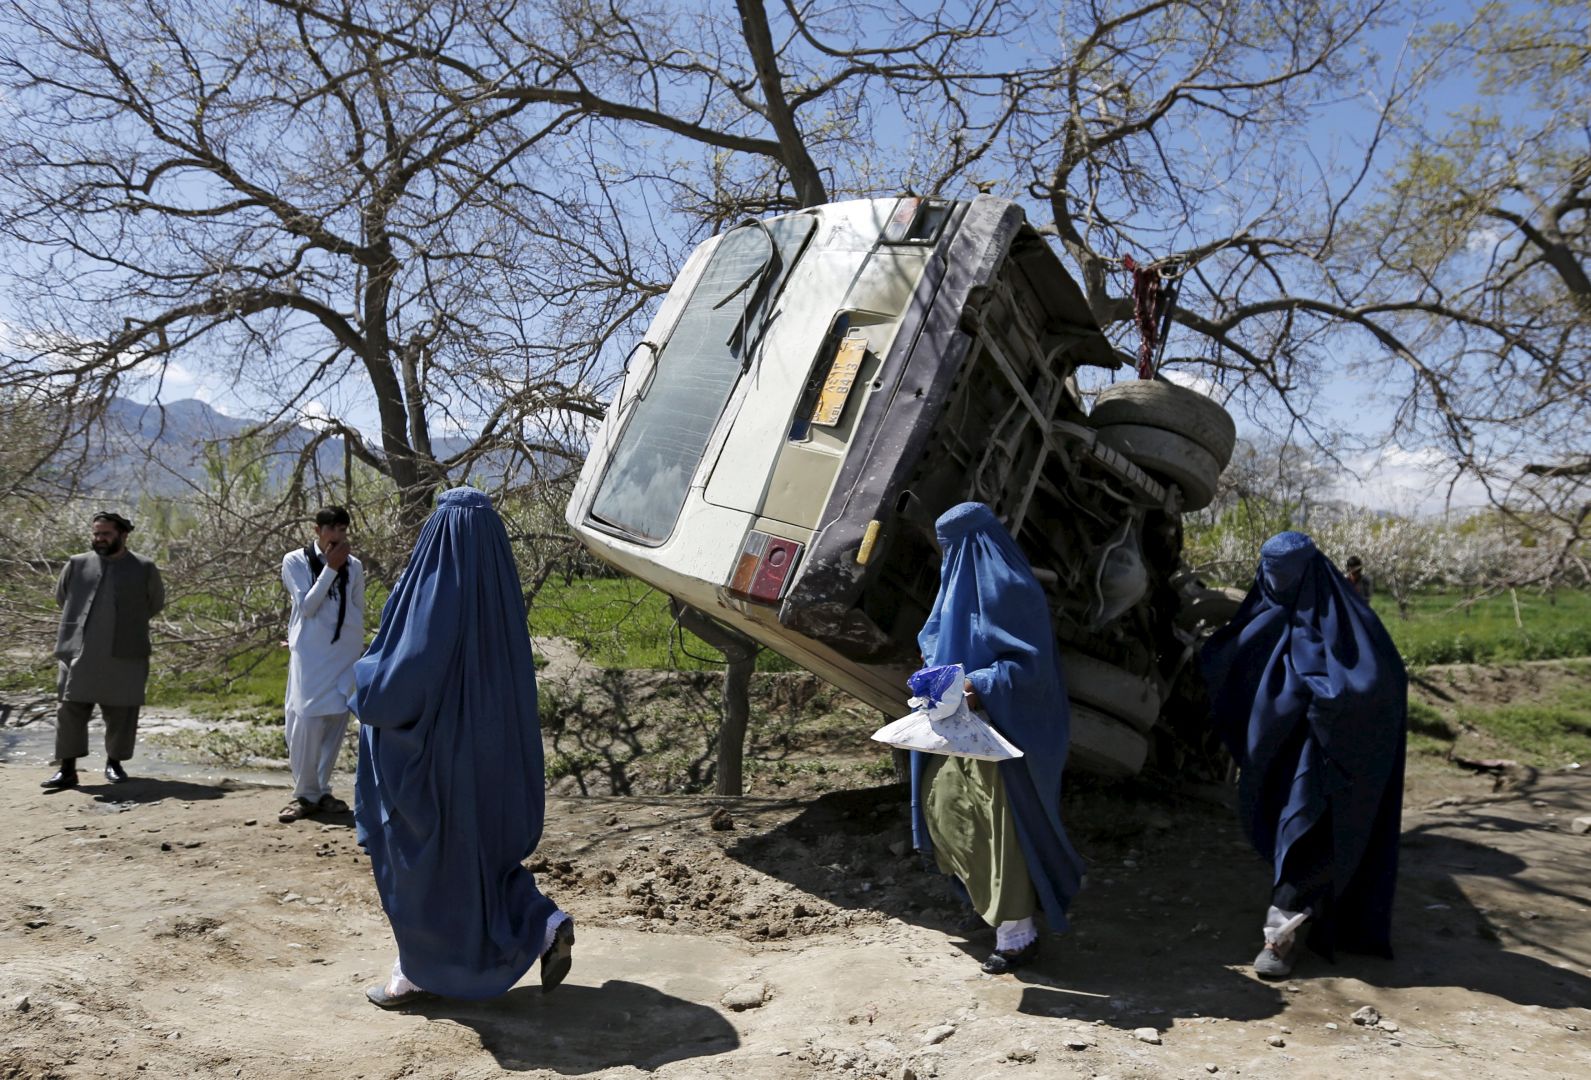 bus bombings kill at least 14 in afghanistan officials photo reuters